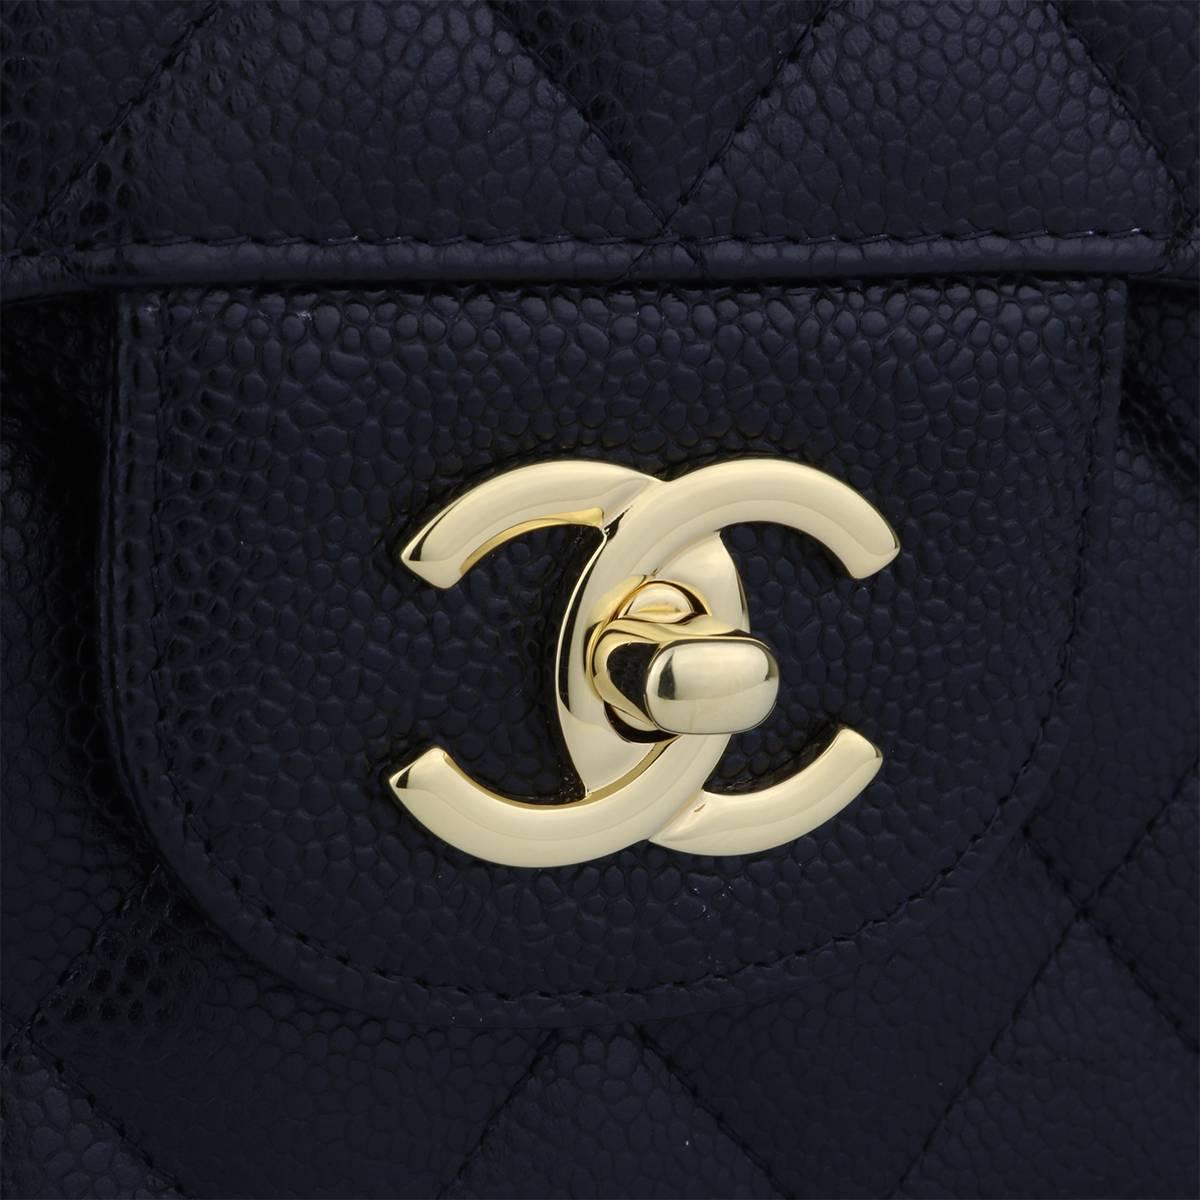 classic chanel double flap